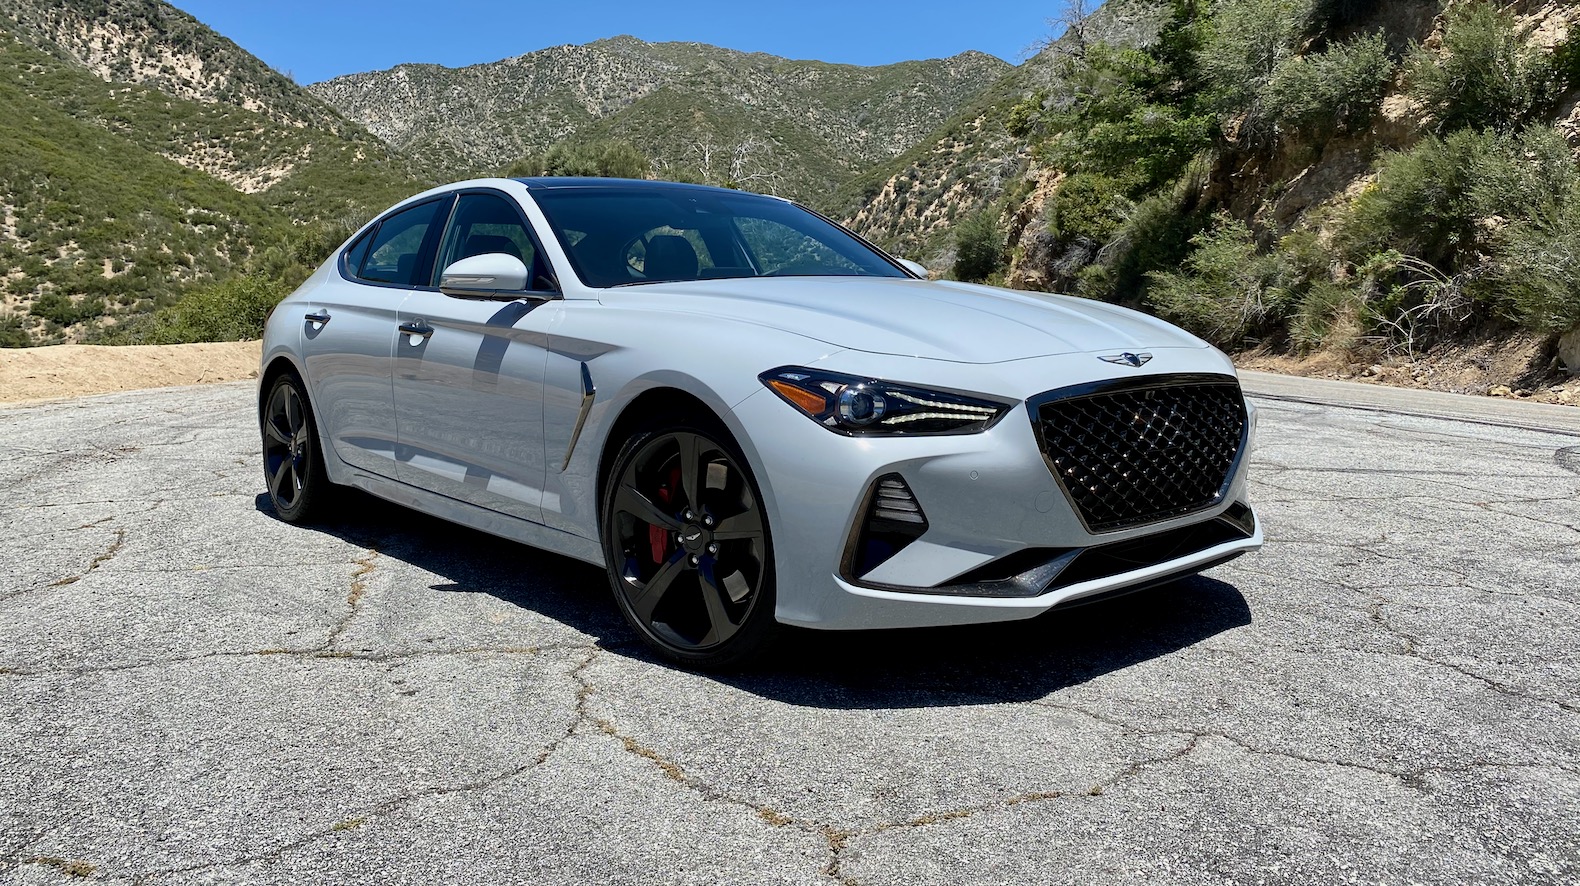 2020 Genesis G70 Review: Aimed squarely at the 3 Series - The Torque Report